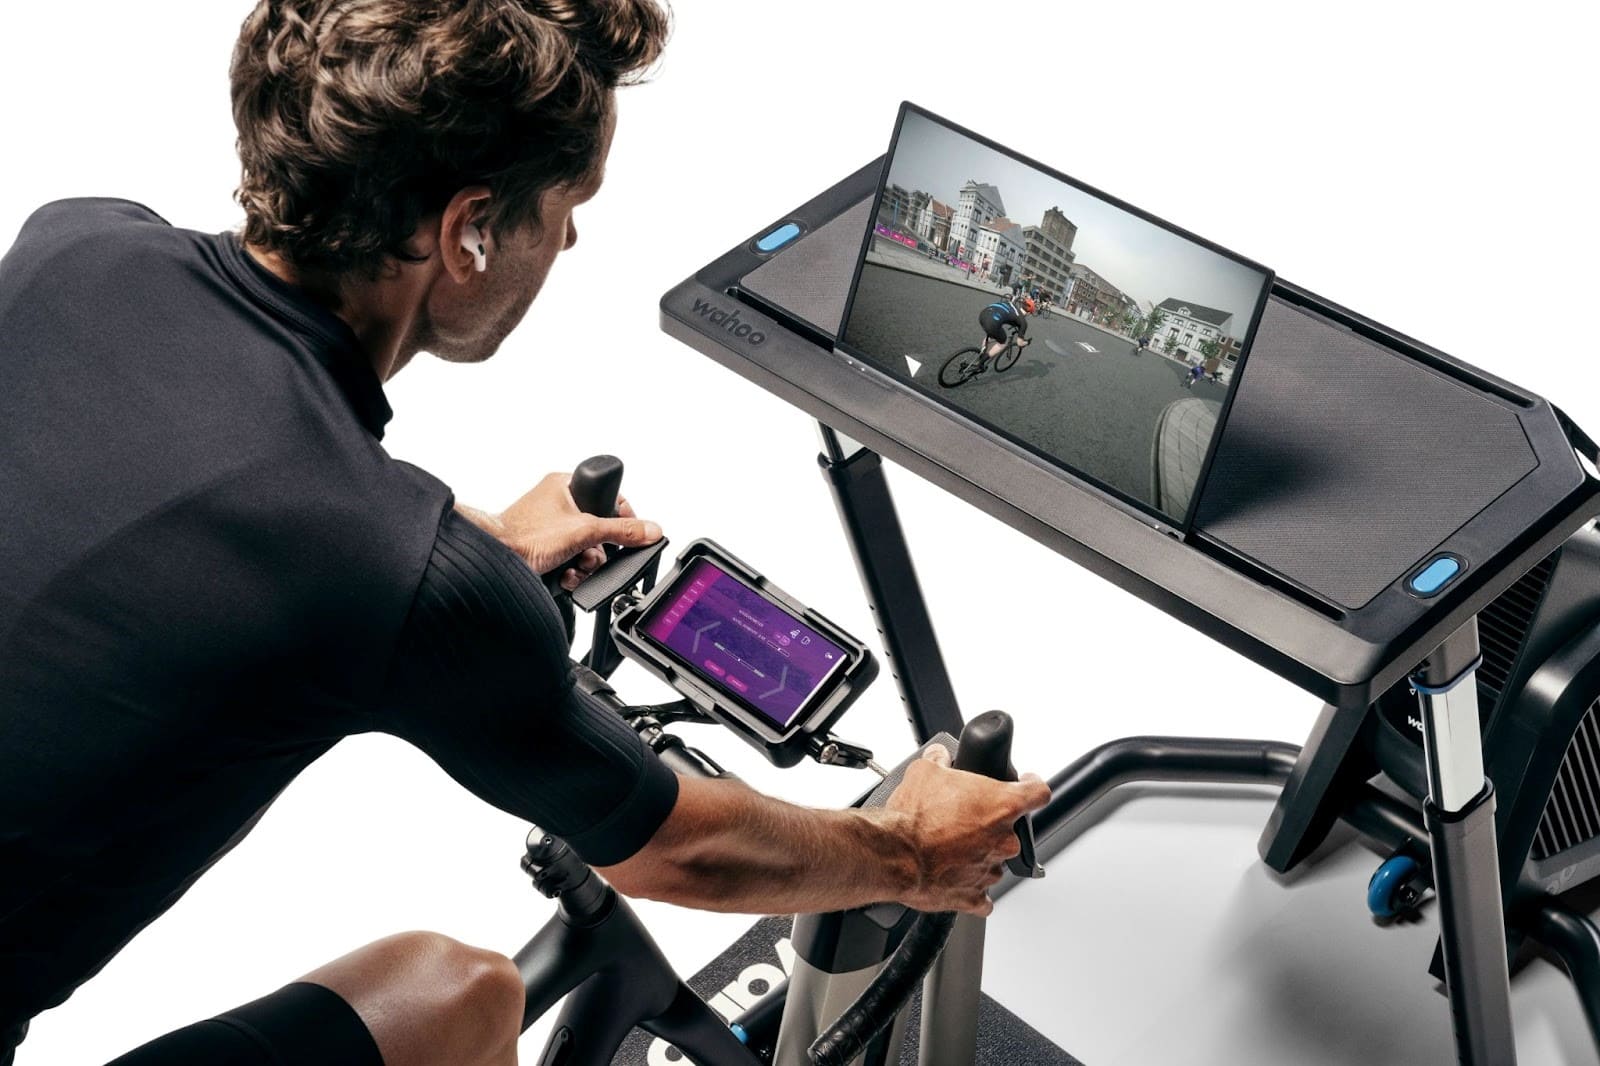 Wahoo KICKR STEER accessory adds virtual steering to RGT for any bike with standard bars or via an app. Probably won’t come to Zwift